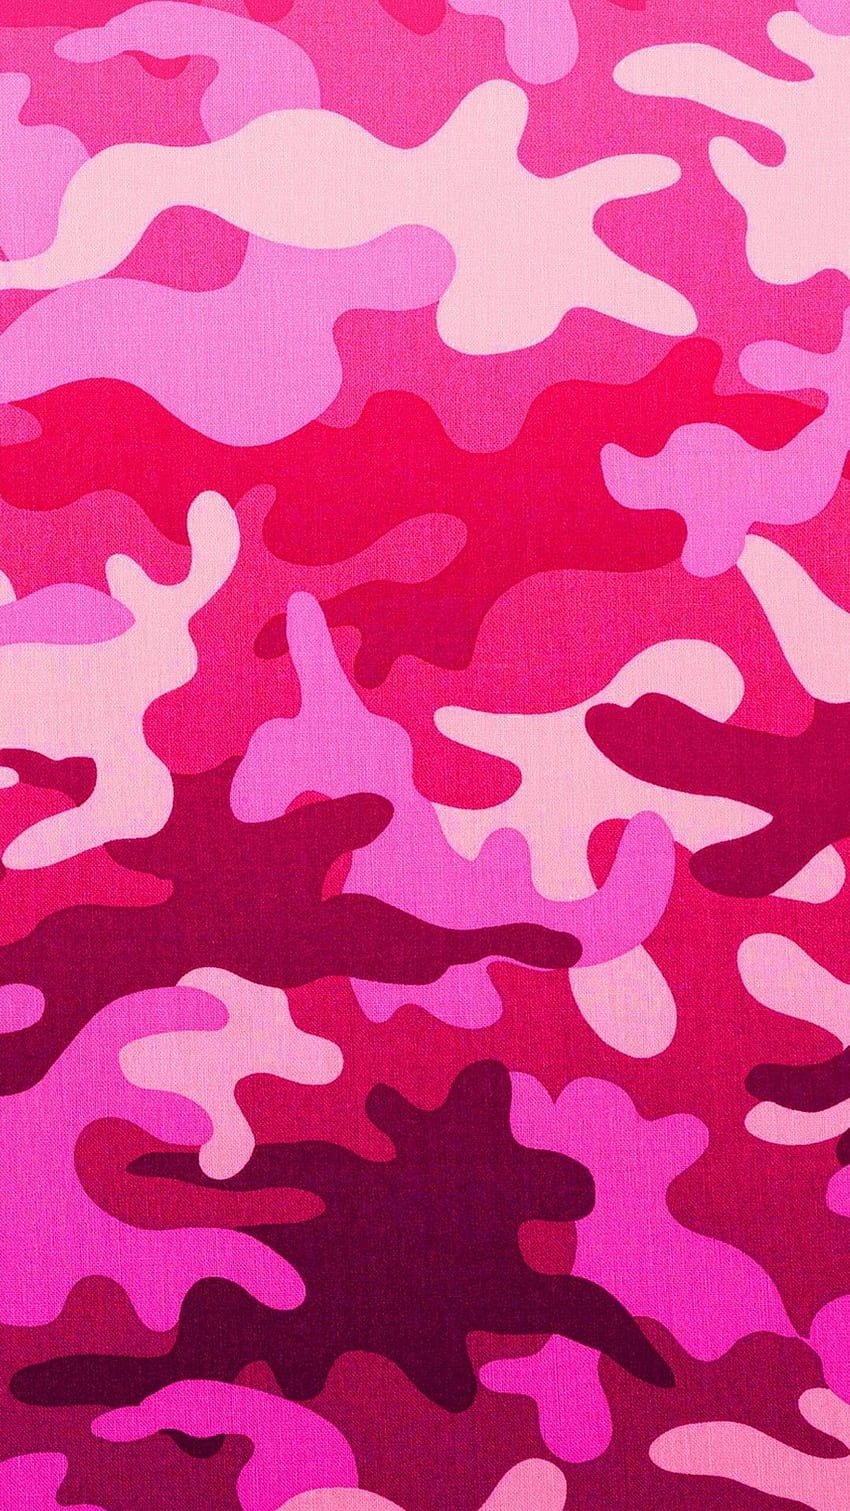 Pink gold camo camouflage phone wallpaper iphone background lock screen  Camouflage  wallpaper Camoflauge wallpaper Camo wallpaper